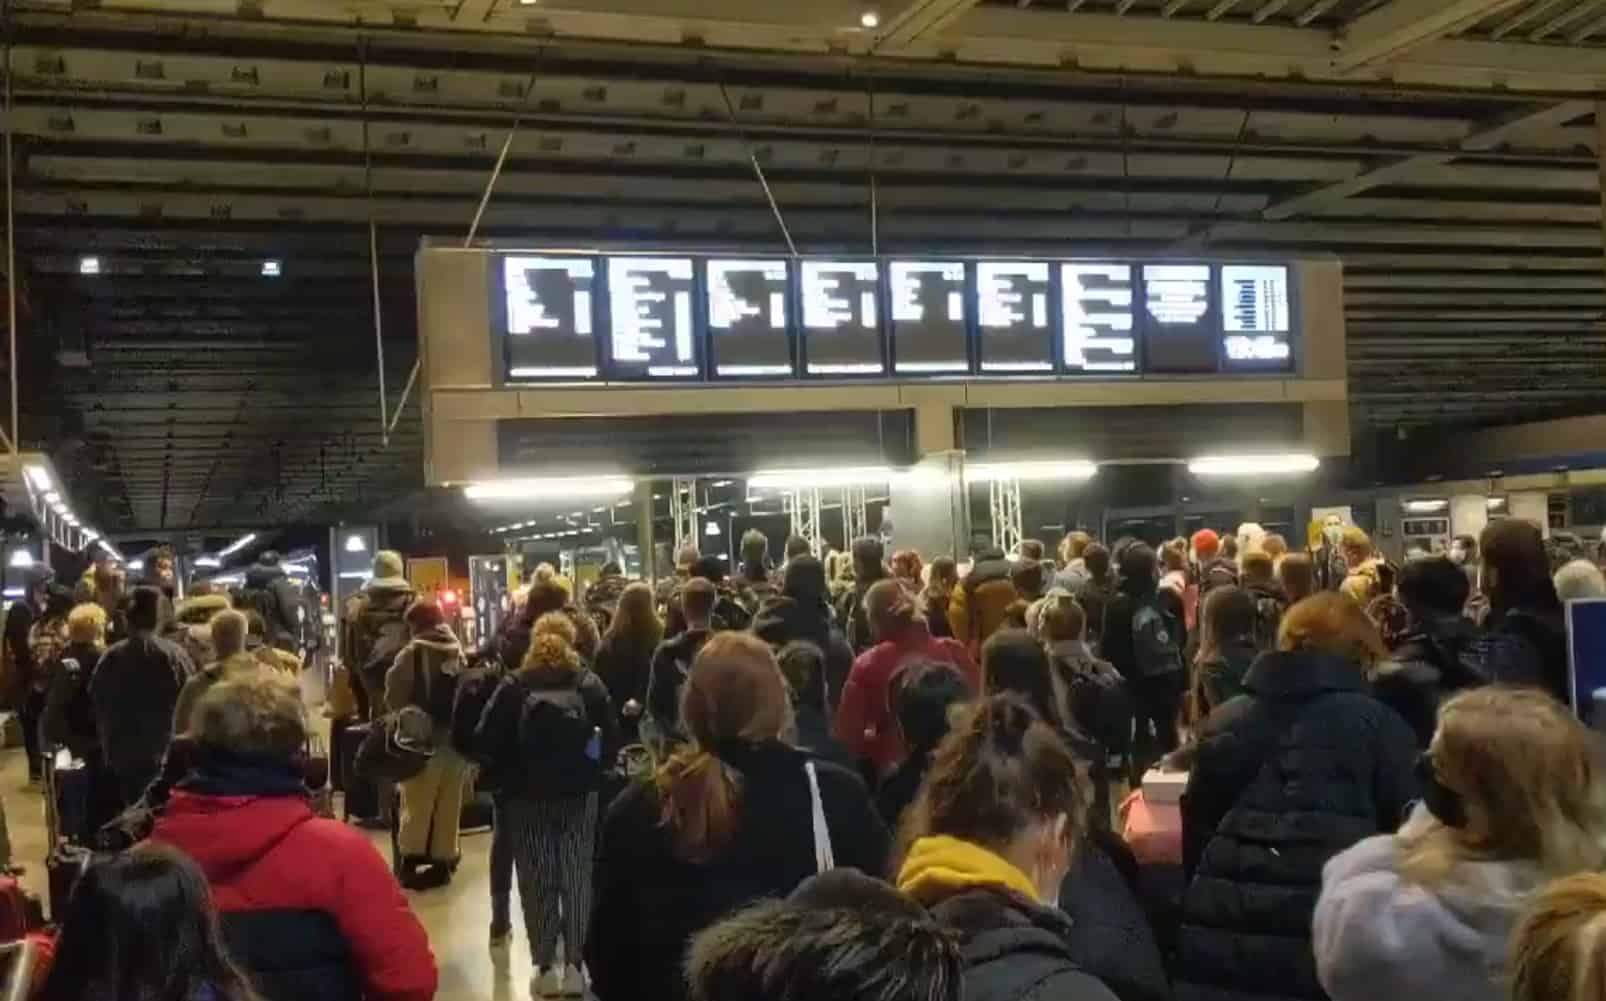 London stations rammed as thousands flee ‘tier 4’ for Christmas